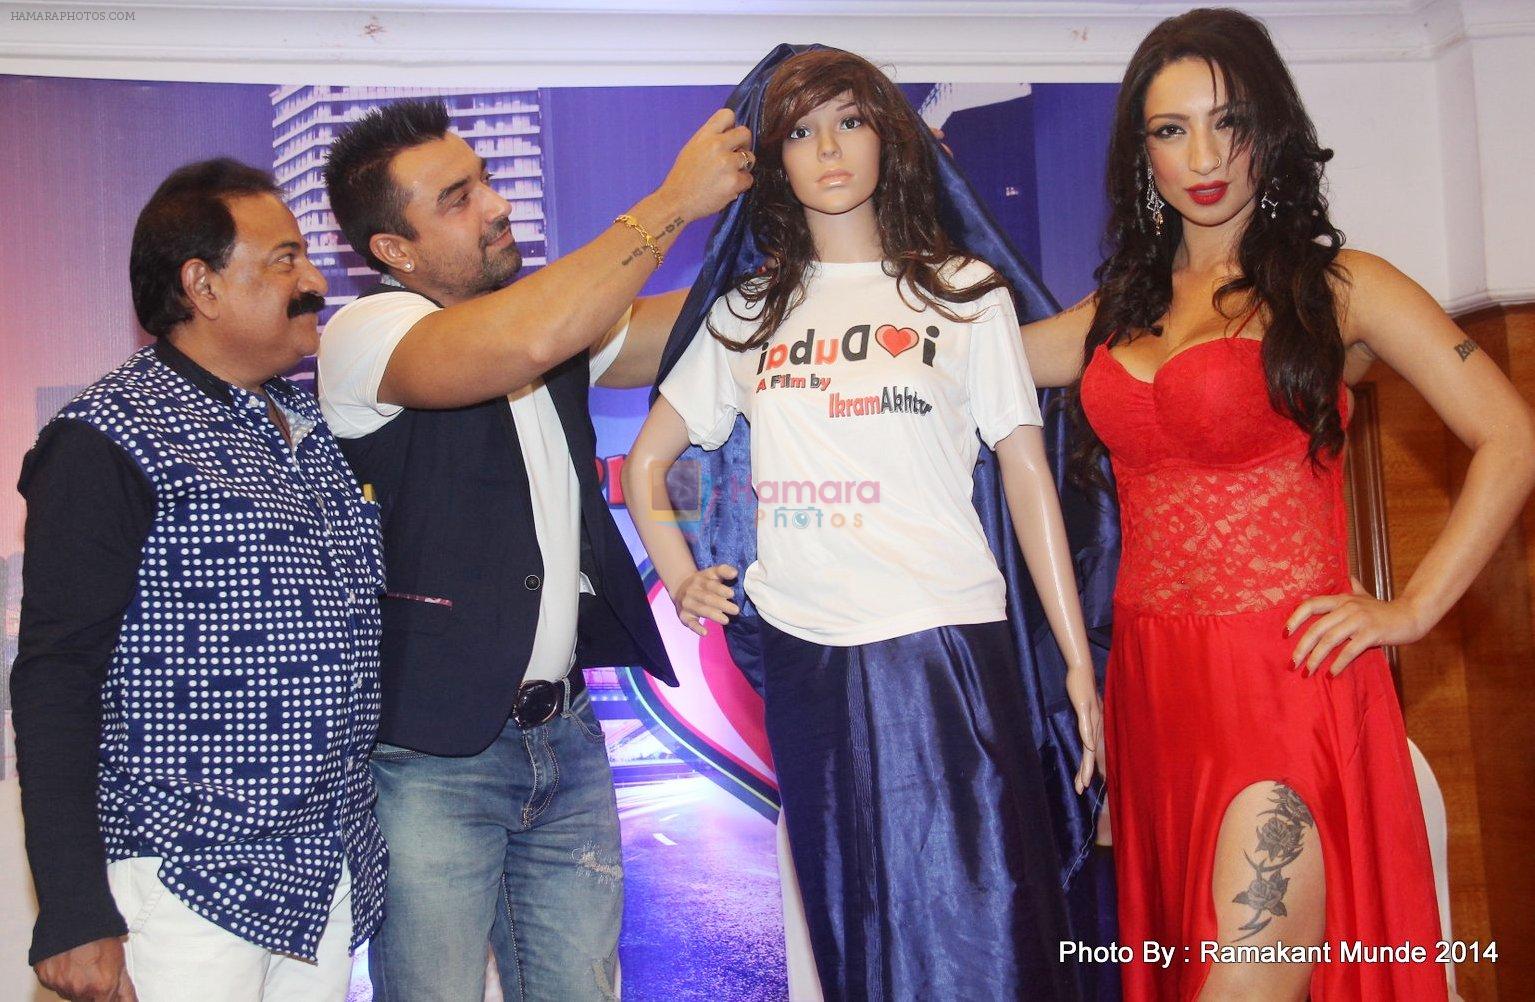 Ikram Akhtar, actor Ajaz Khan and adult star Shanti Dynamite unveiling the first look of the movie _I Love Dubai_